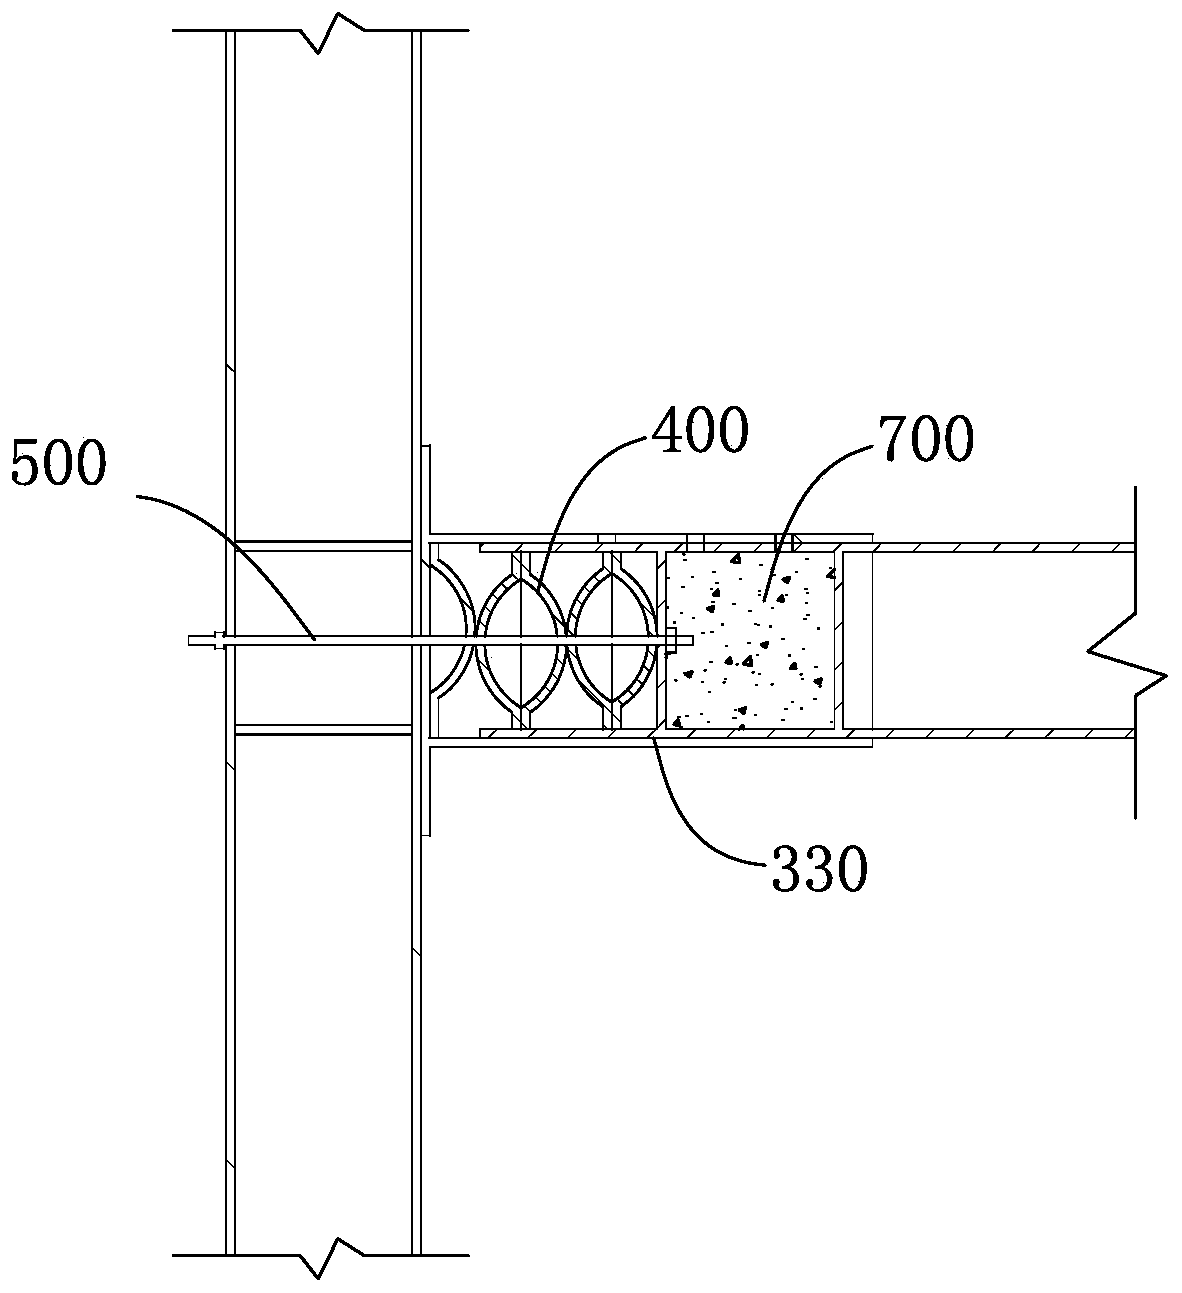 Beam-column connection nodes and connection methods of fabricated steel structures